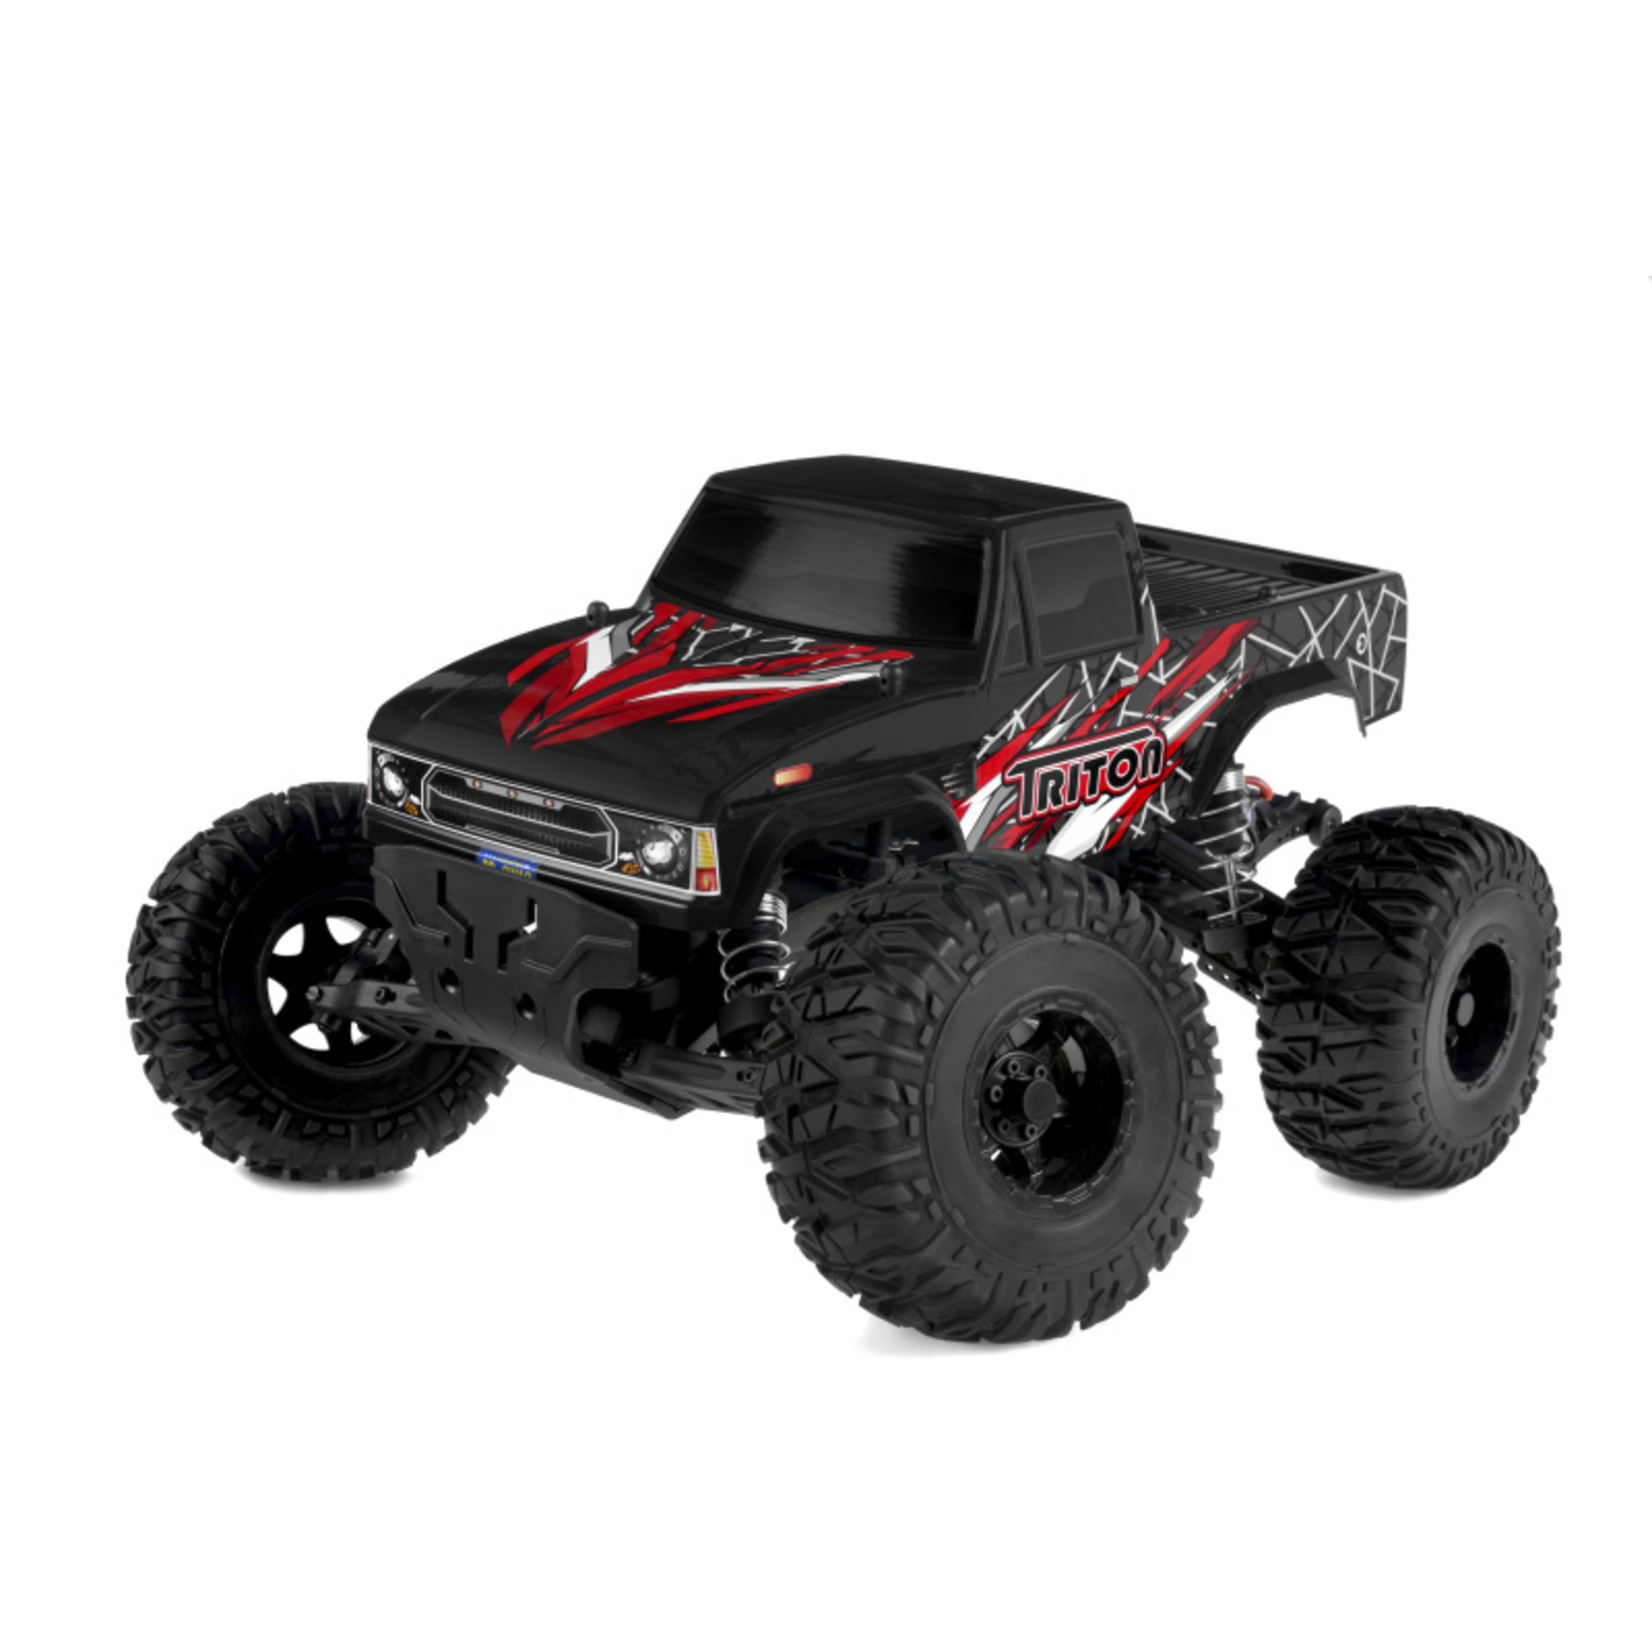 Corally (Team Corally) 1/10 Triton XP 2WD Monster Truck Brushless RTR (No